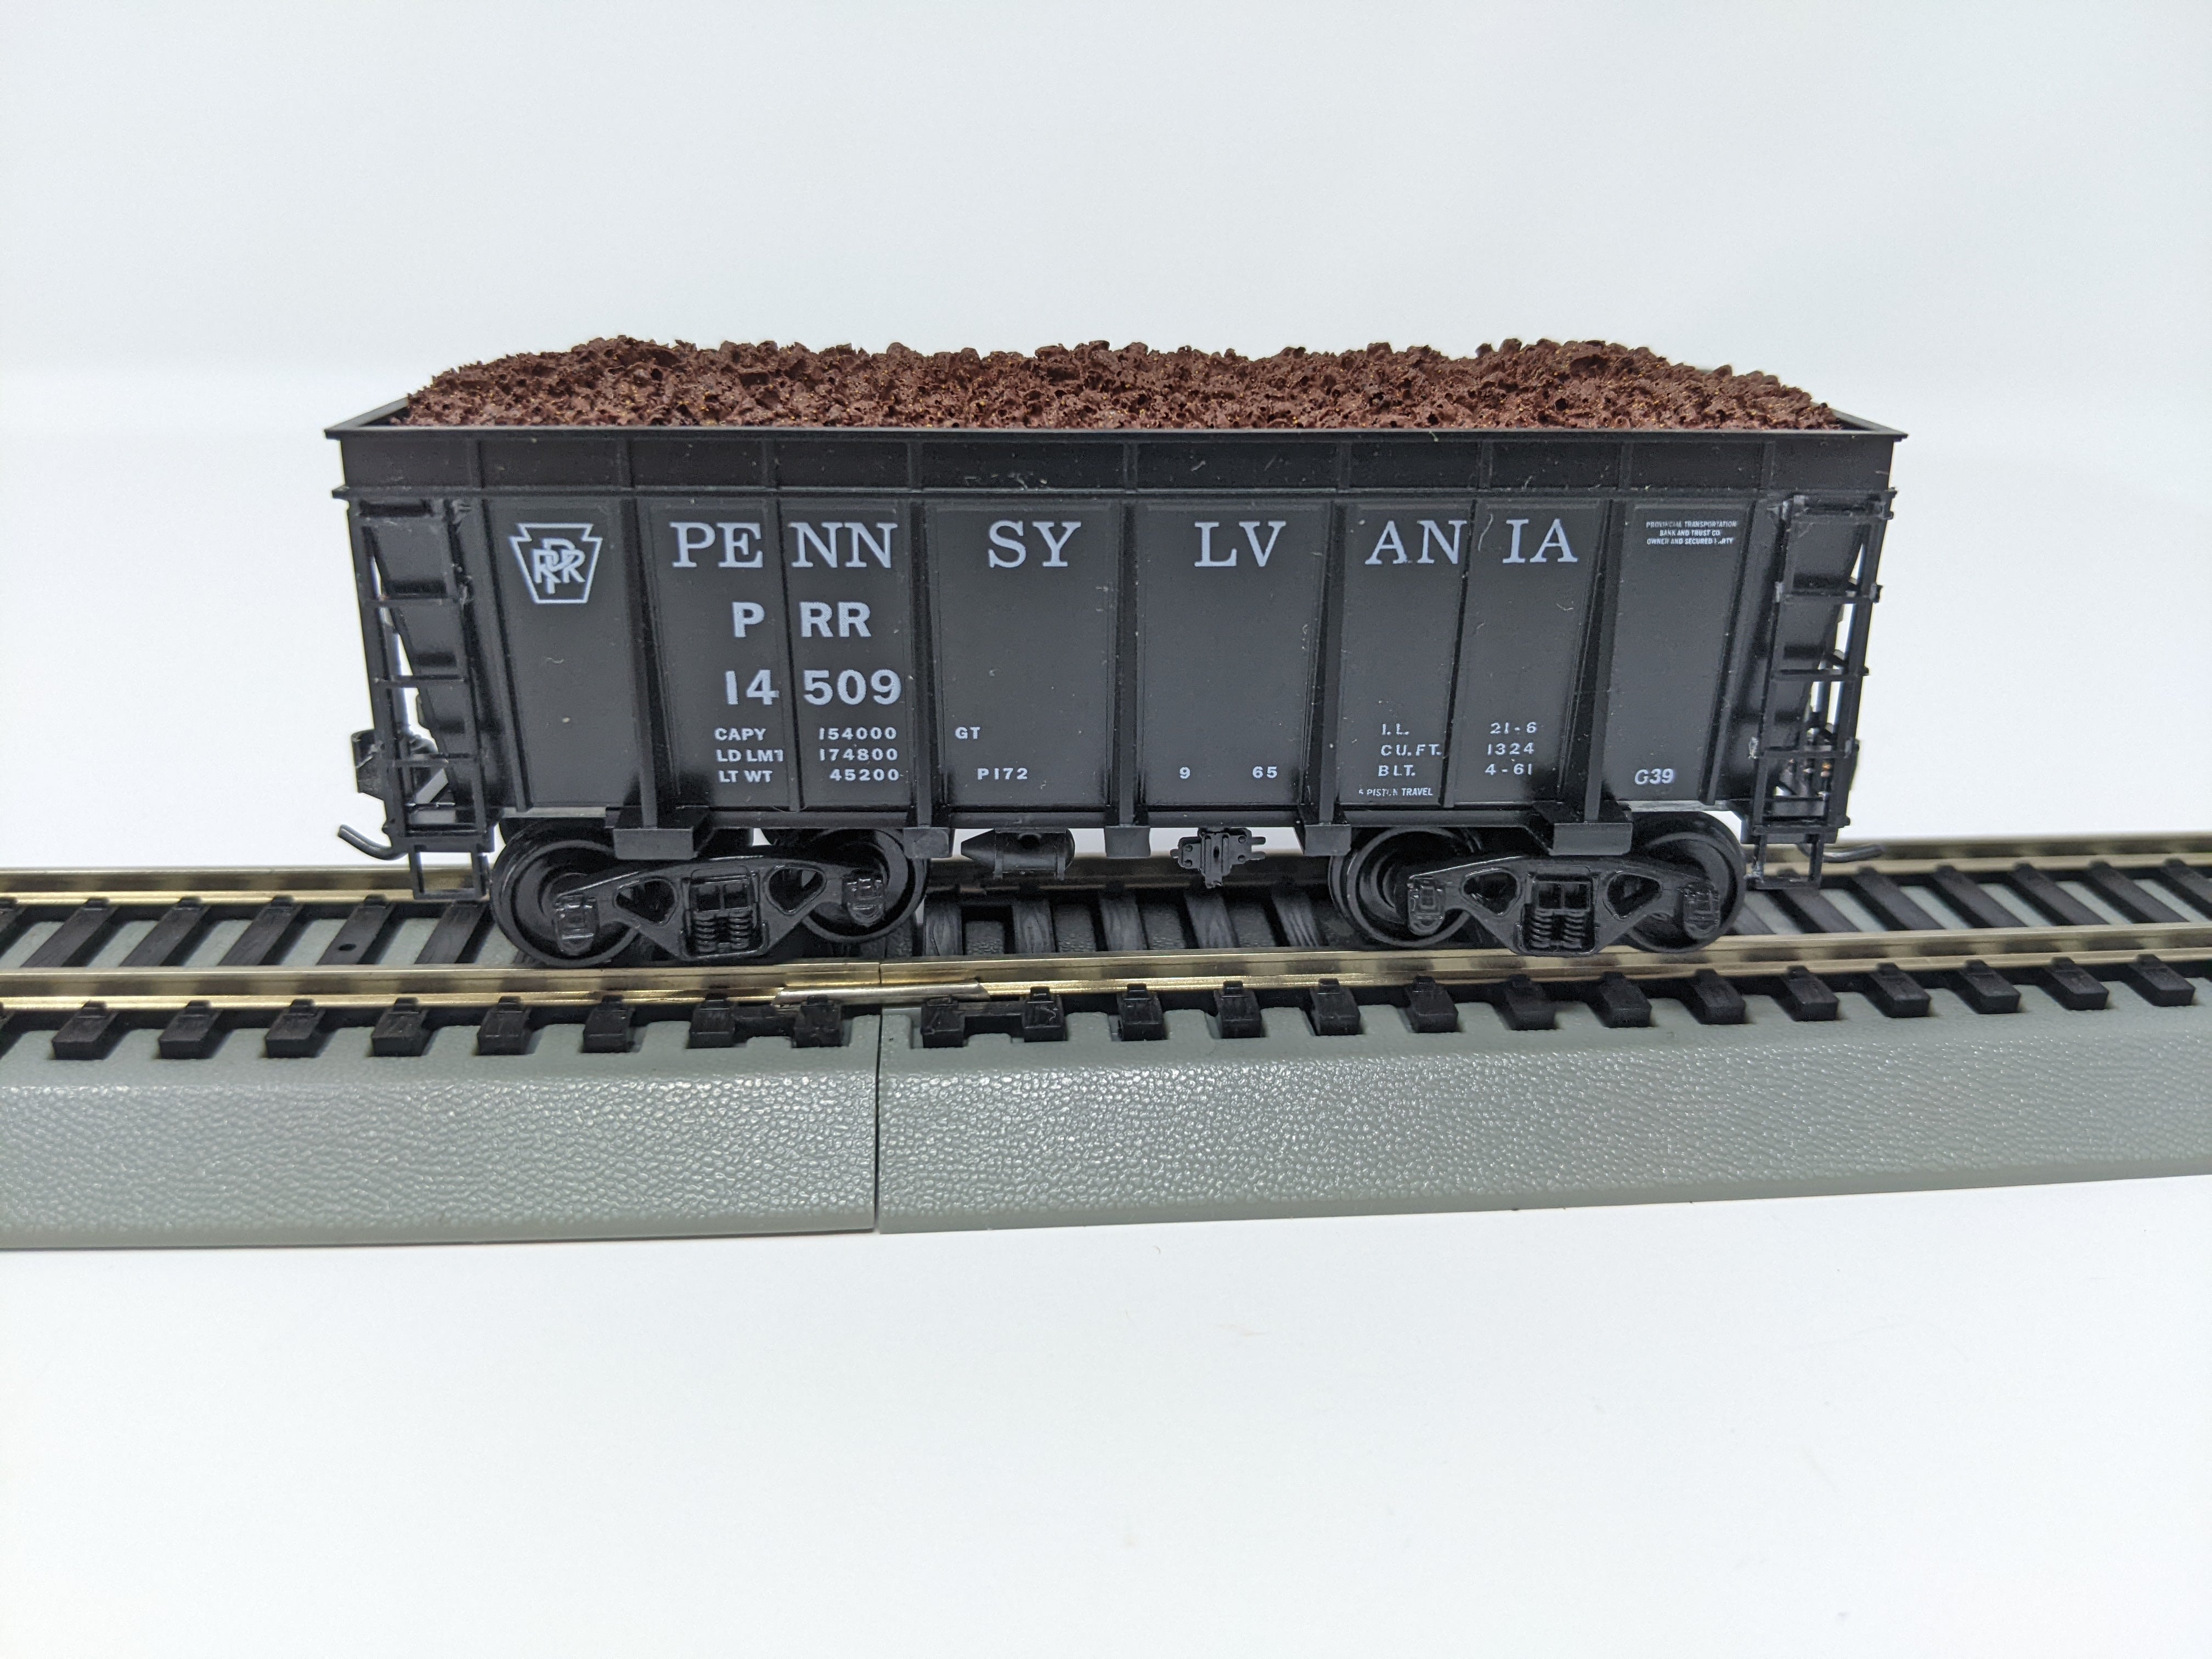 USED Roundhouse HO Scale, 26' High Side Ore Car, Pennsylvania PRR #14509